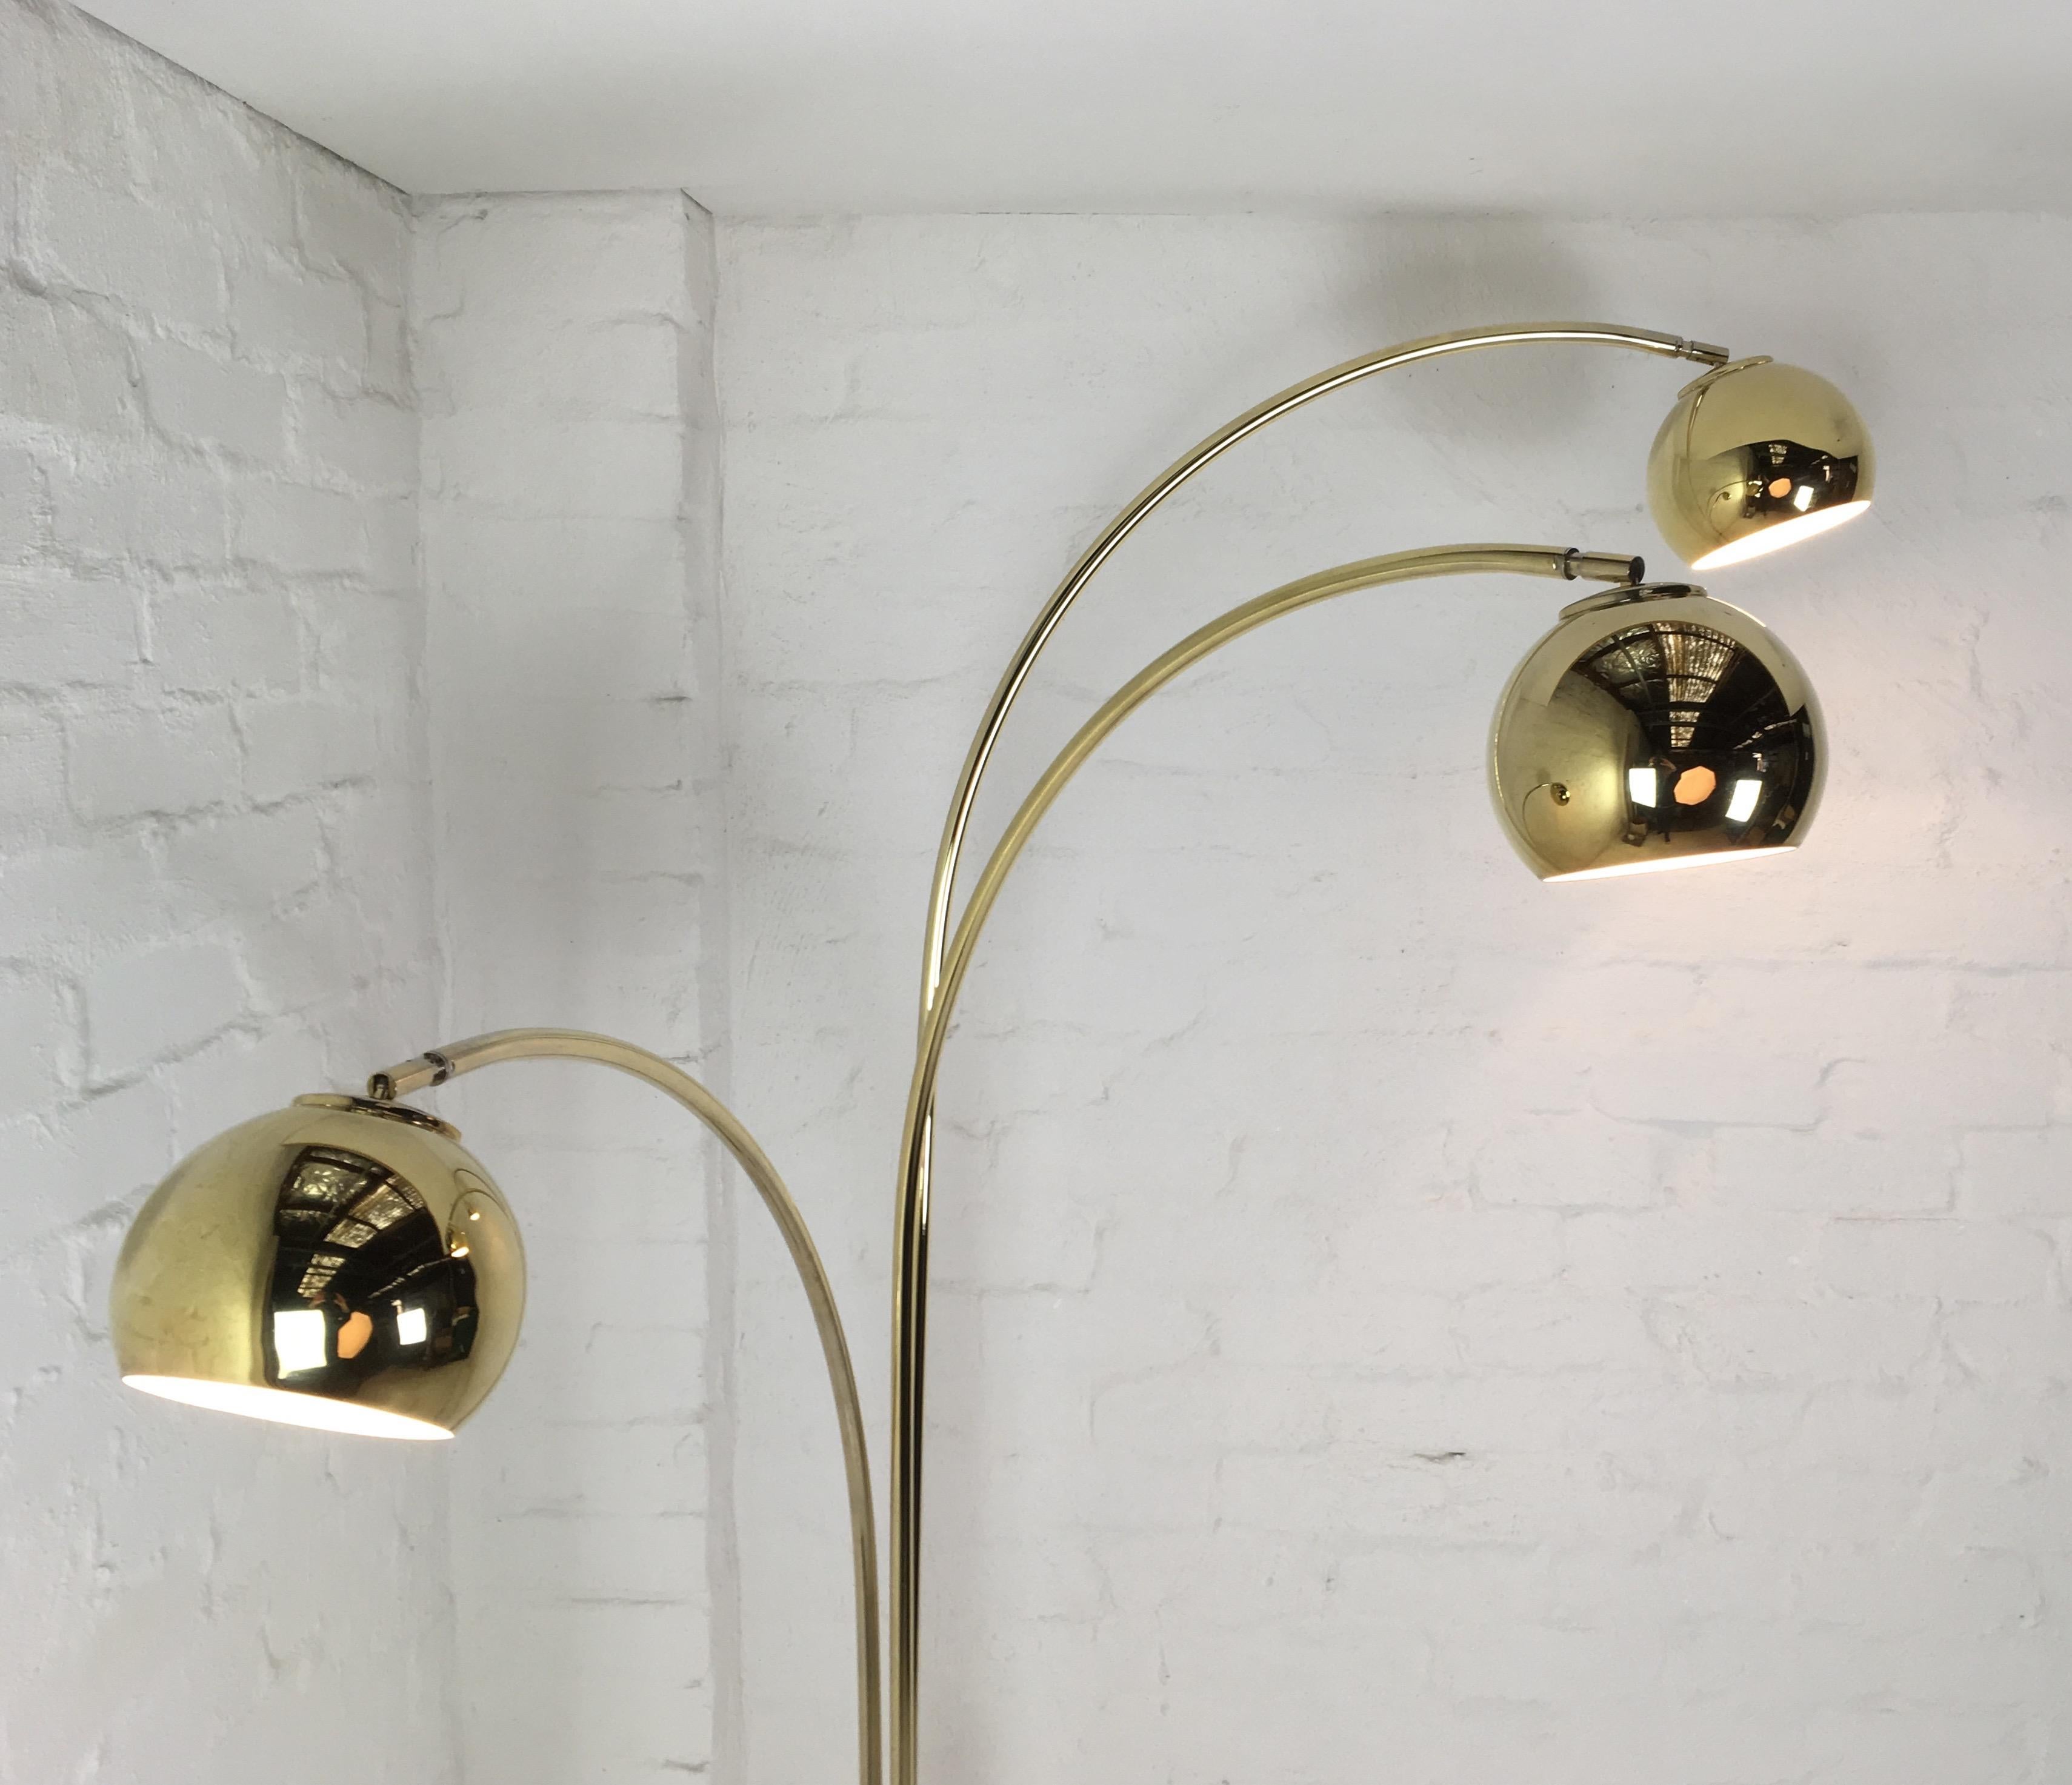 This Classic brass three-arm floor lamp has been fully refurbished, rewired, tested and tagged. It’s ready to plug in and bring some serious class to your living space. 

The arms each move at least 180 degrees left or right with limits once